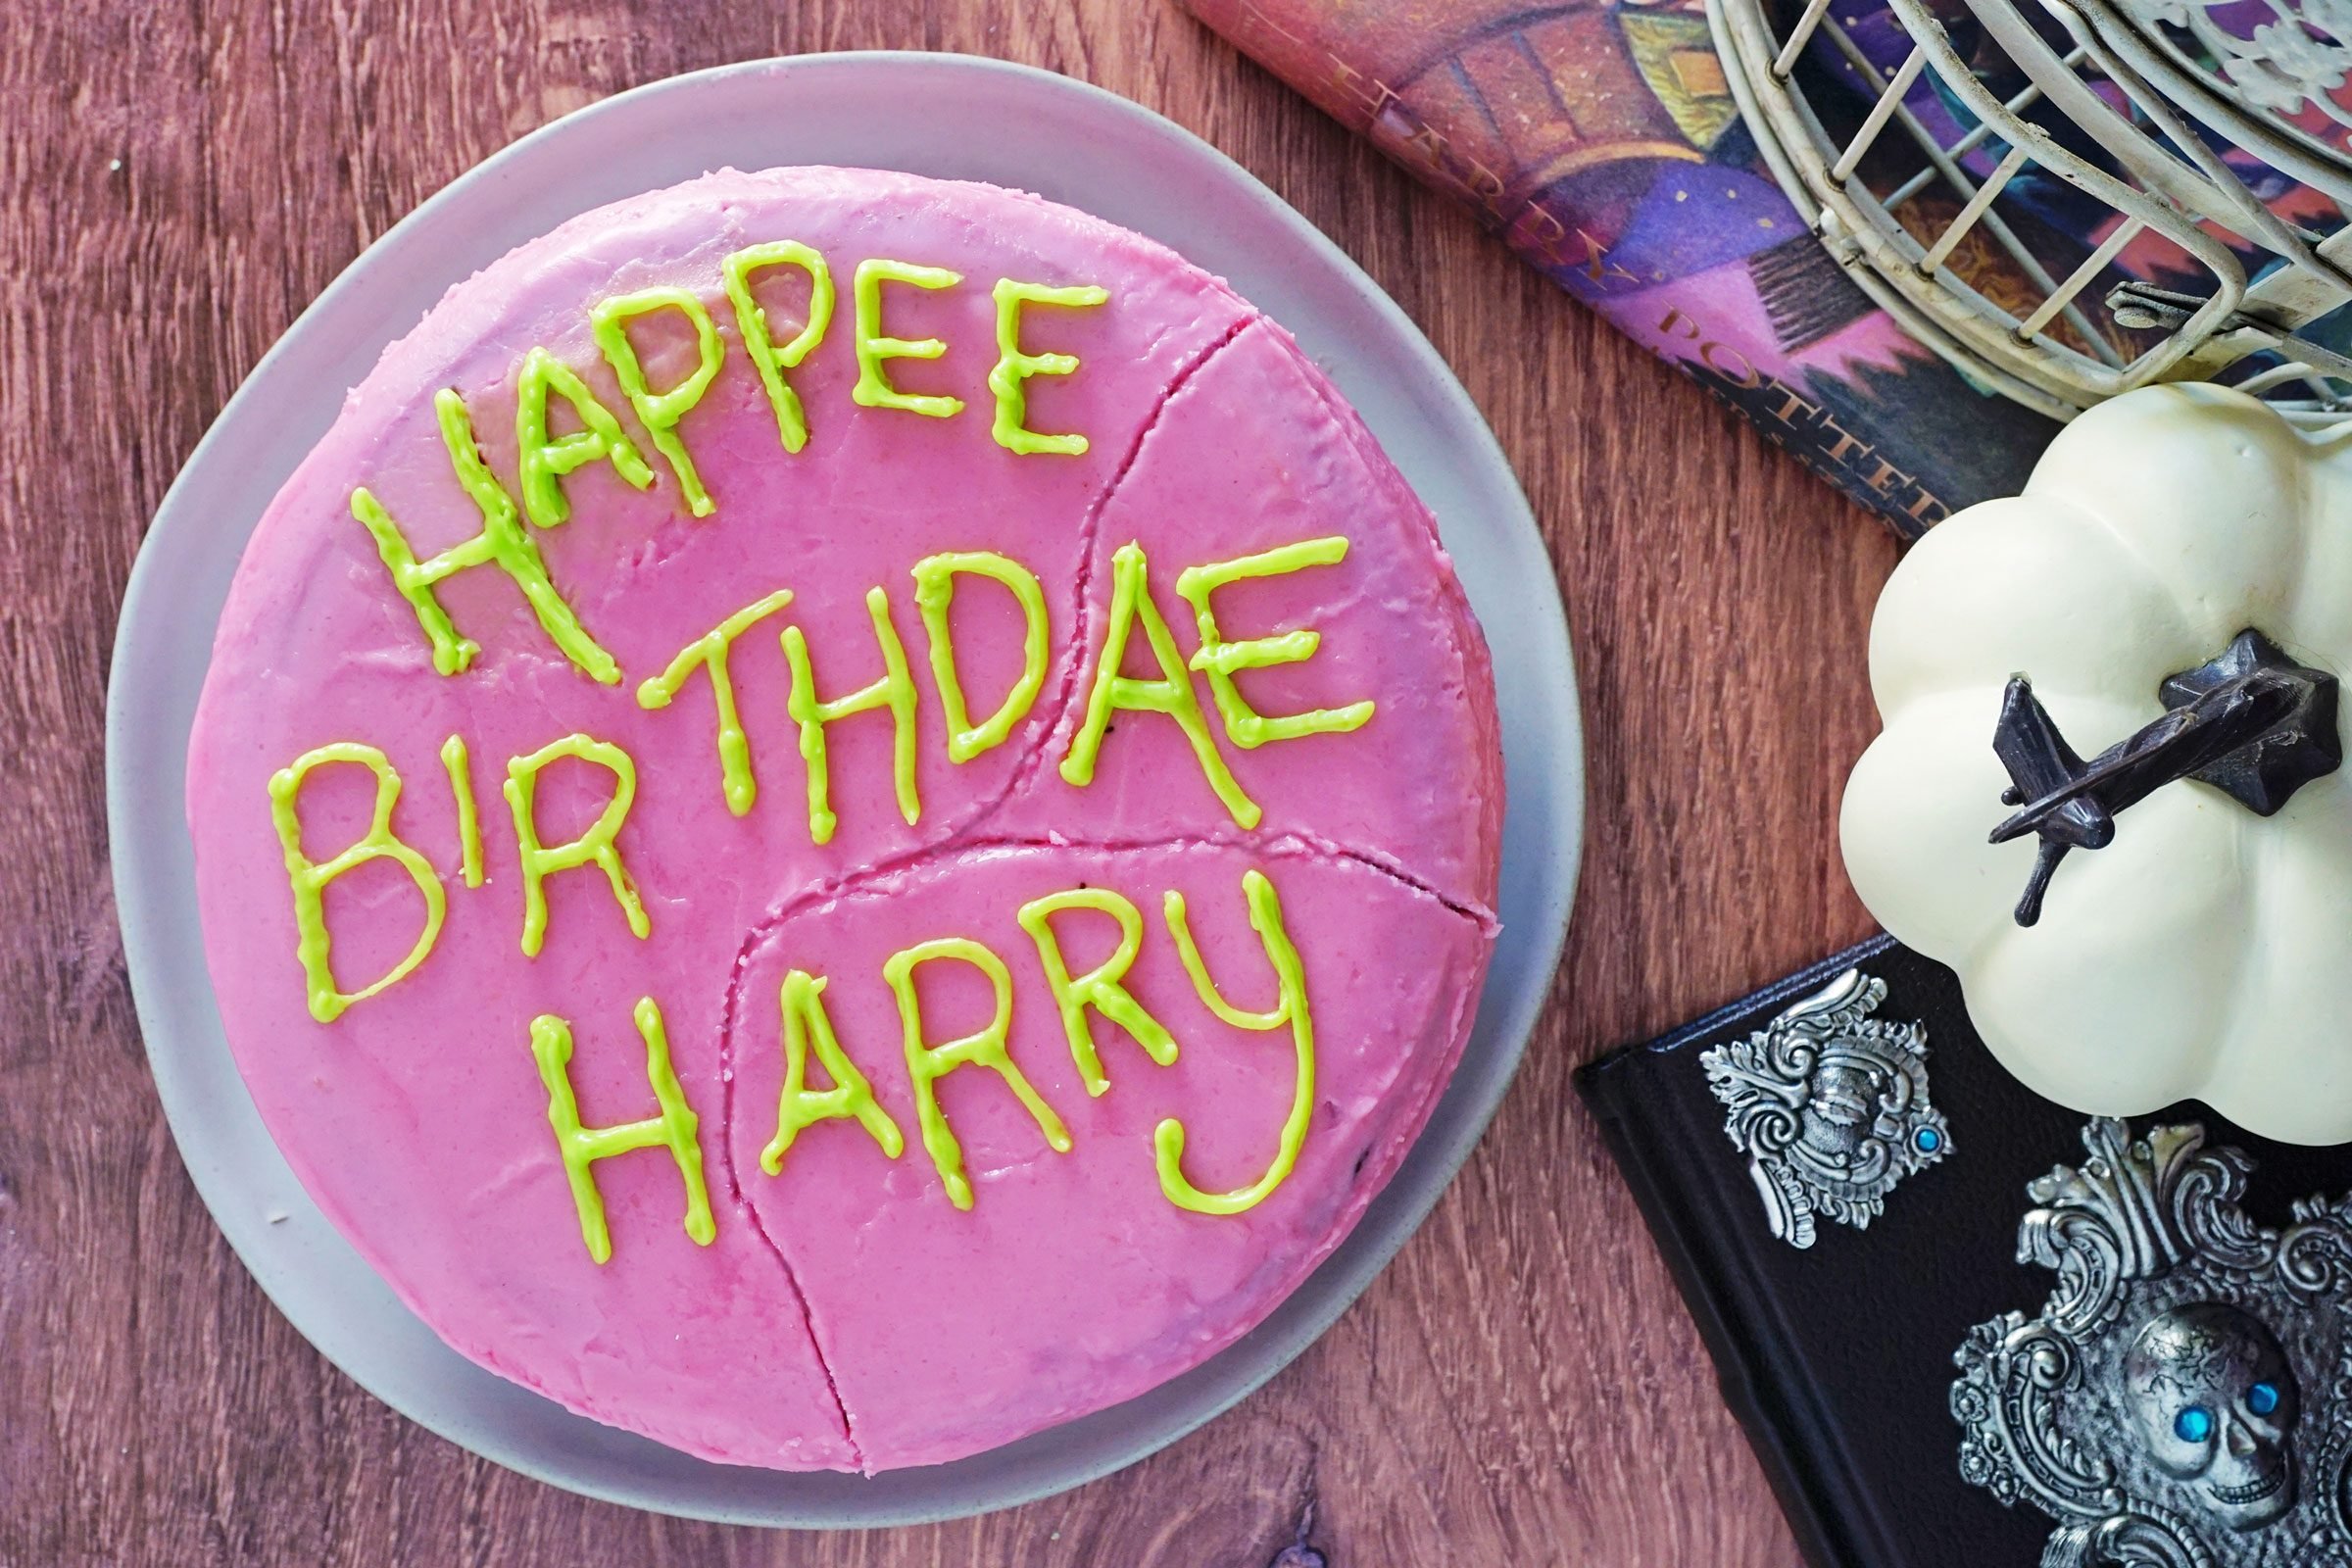 The Best Harry Potter Cake Ideas for Home Bakers